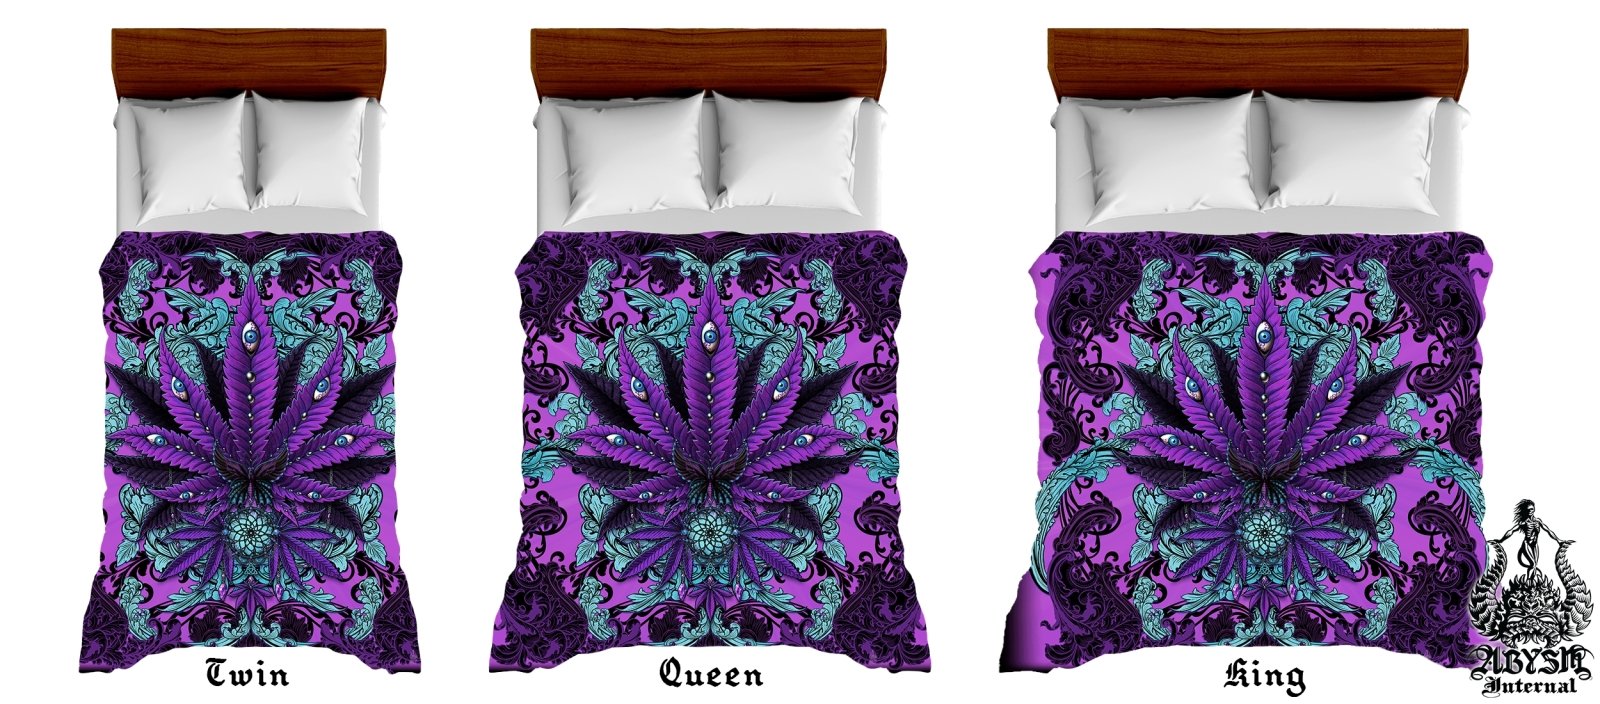 Gothic Weed Bedding Set, Comforter and Duvet, Cannabis Bed Cover, Marijuana Bedroom Decor, King, Queen and Twin Size, 420 Room Art - Pastel Goth - Abysm Internal